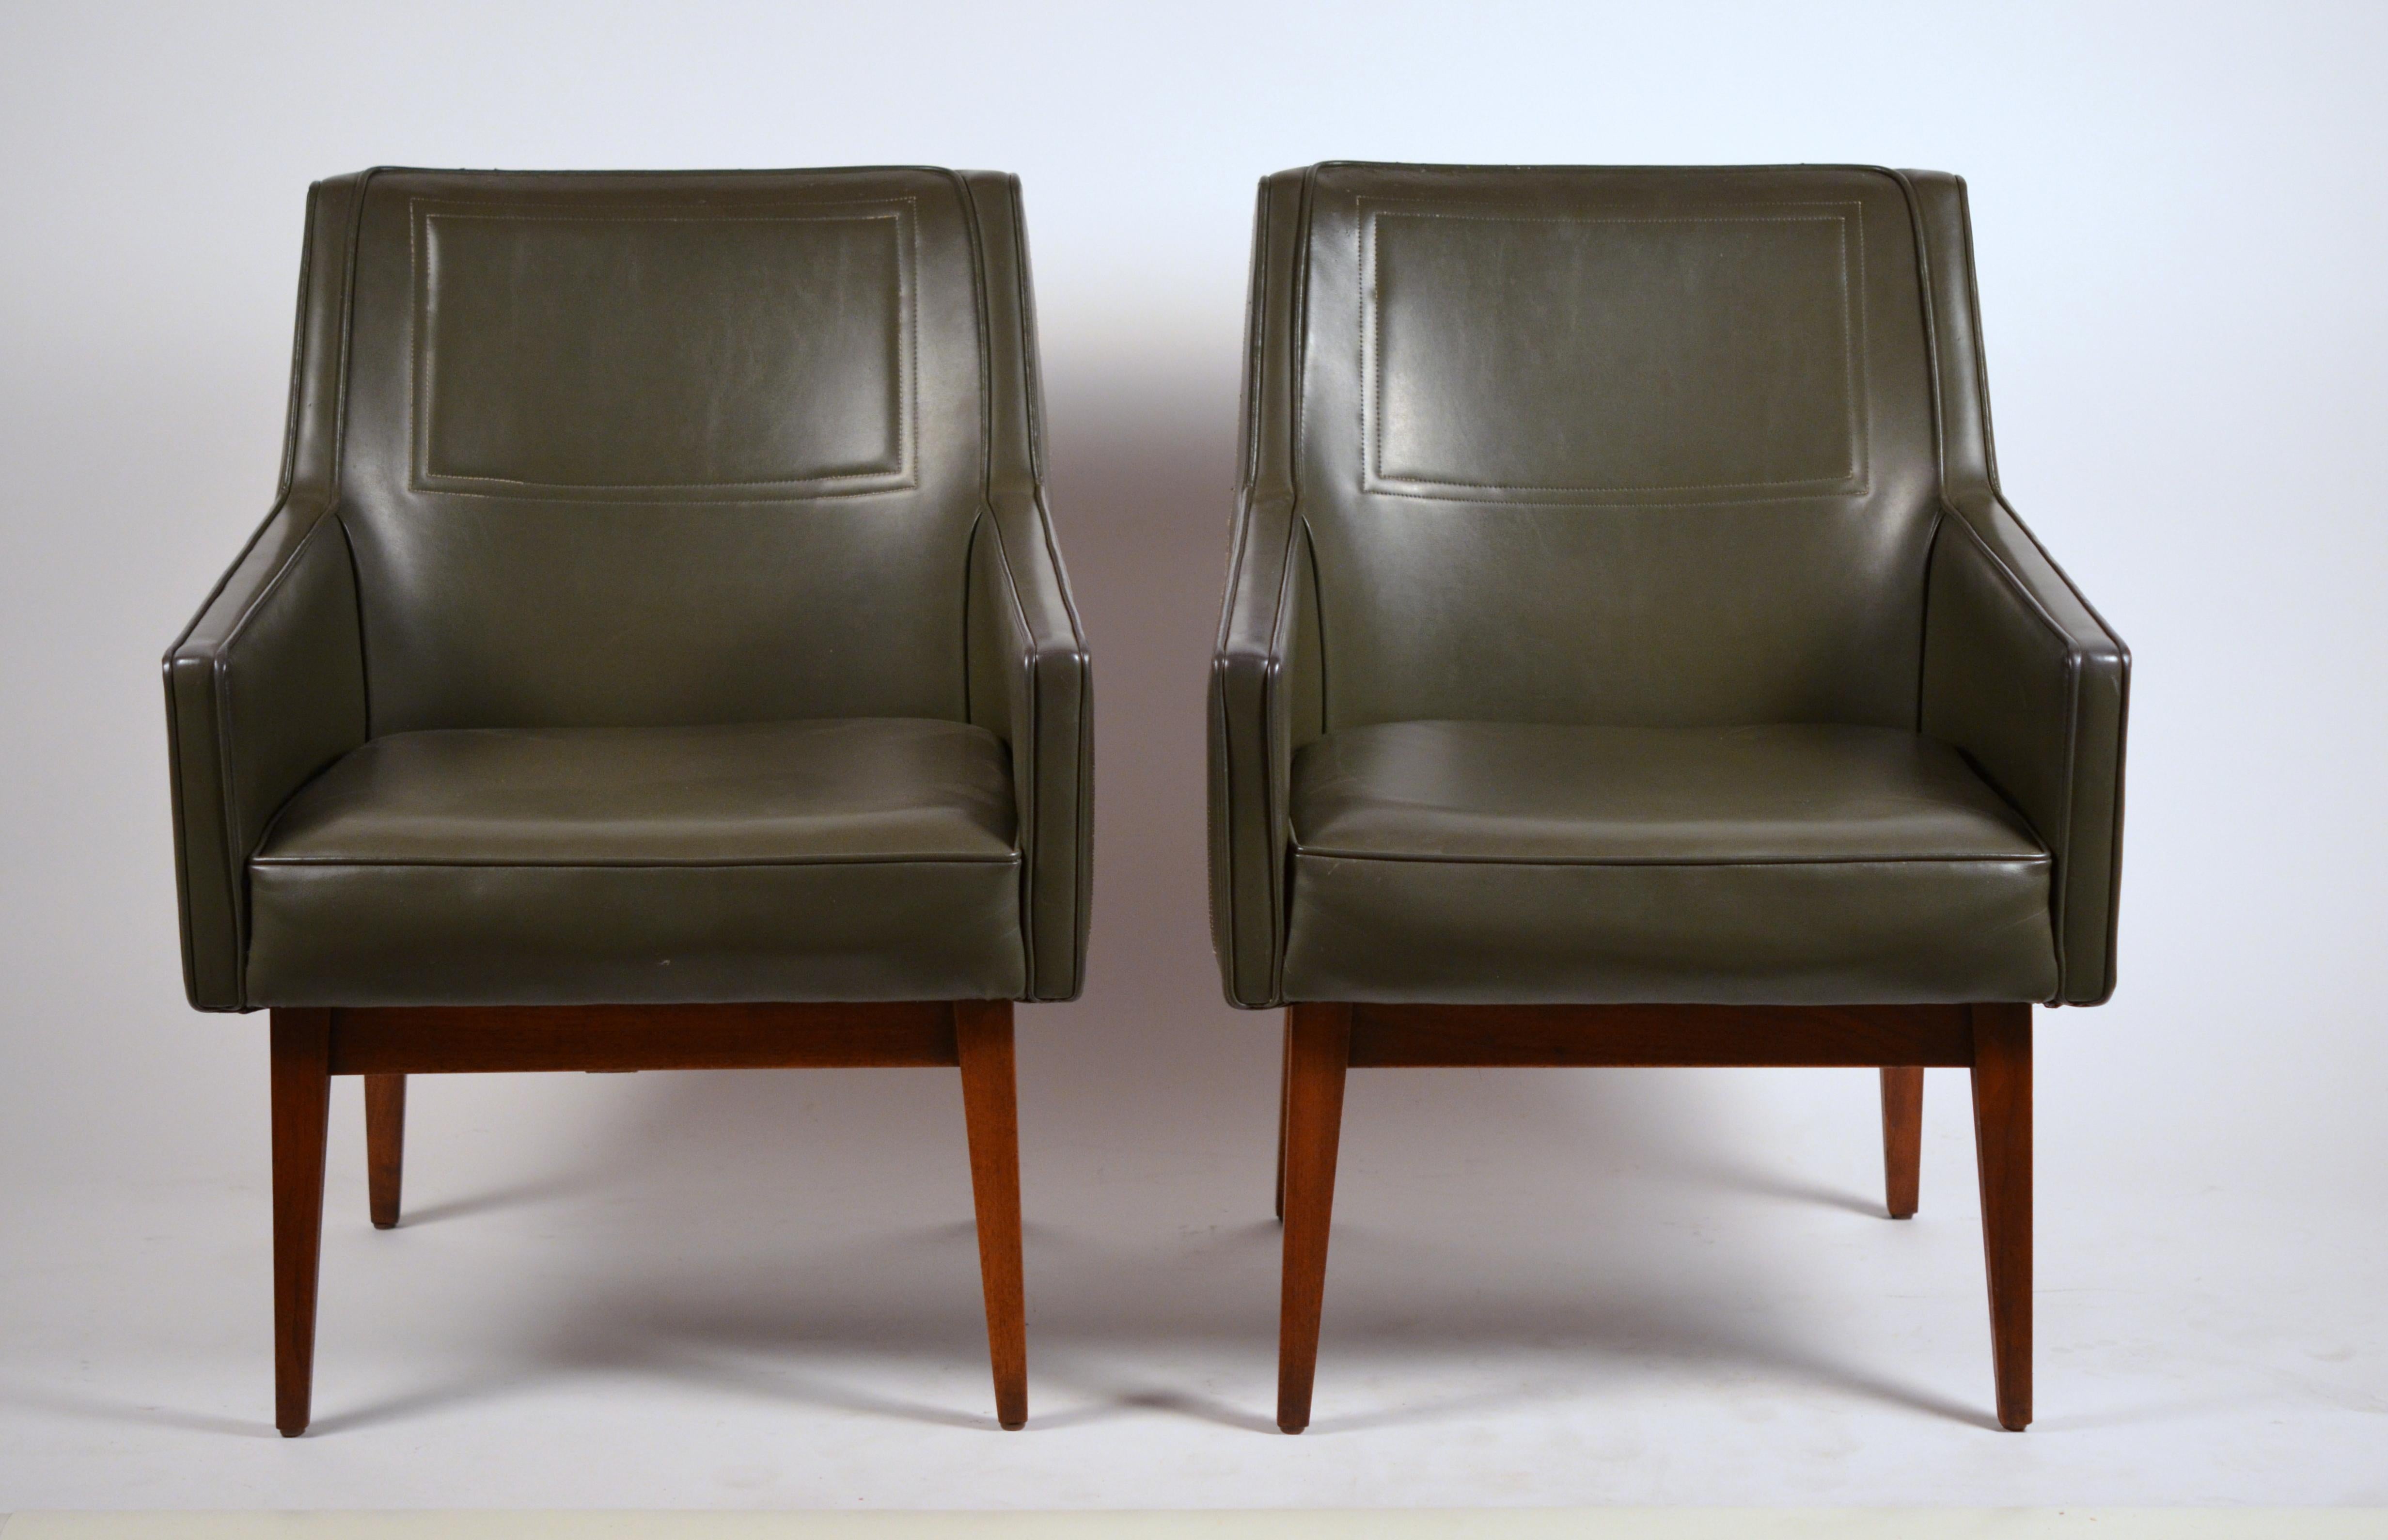 Pair of early California modernist armchairs by Vista of California for Stow Davis.

Measures: 22 in. arm height.